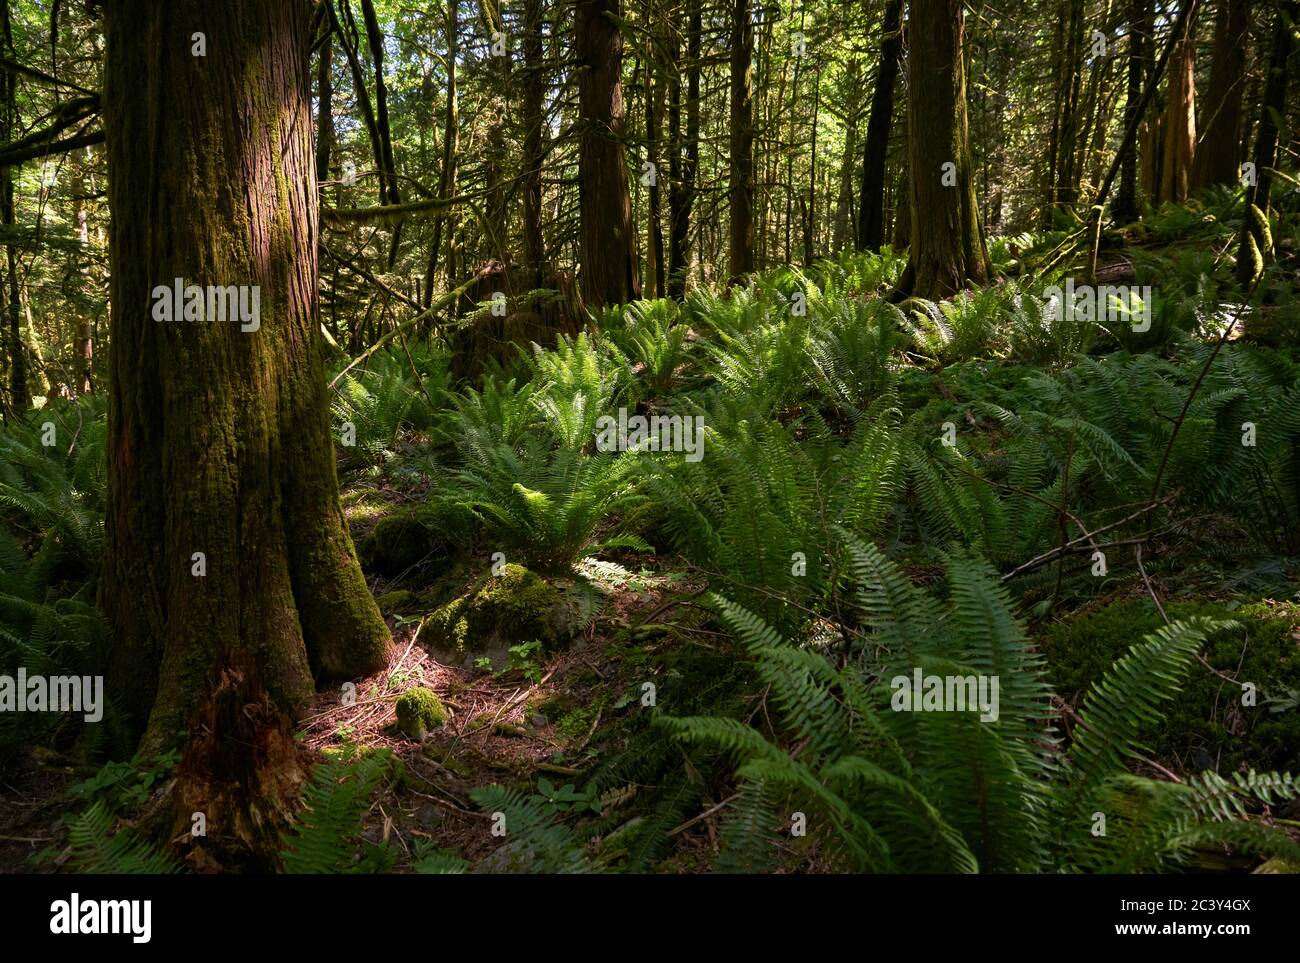 Pacific Northwest Forest Sunshine. A lush, temperate rainforest floor of the Pacific Northwest. Stock Photo